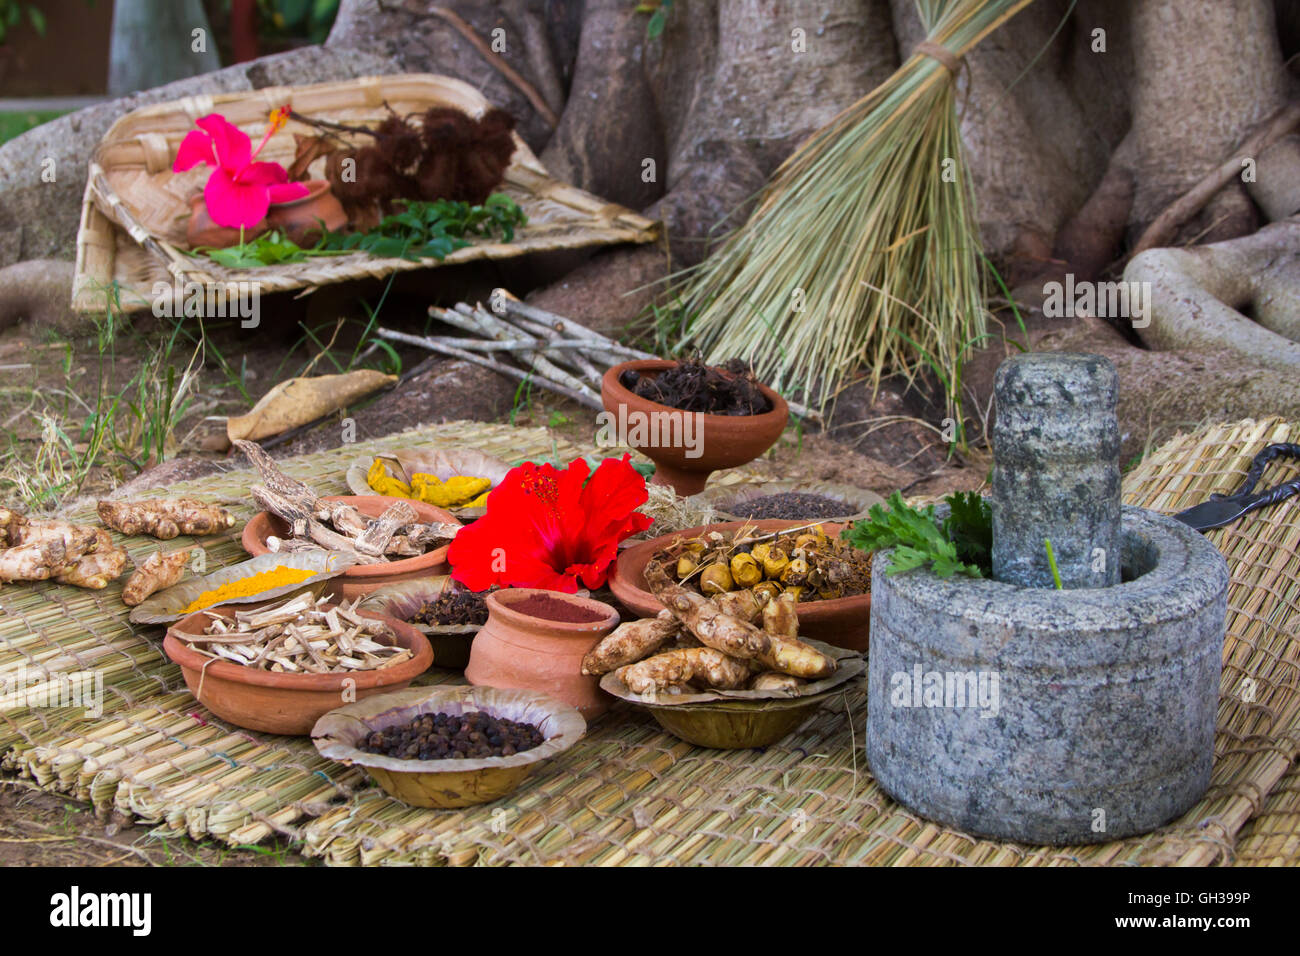 A traditional Ayurveda and natural medicine apothecary with stone mortar and pestle, herbs and spices. Stock Photo